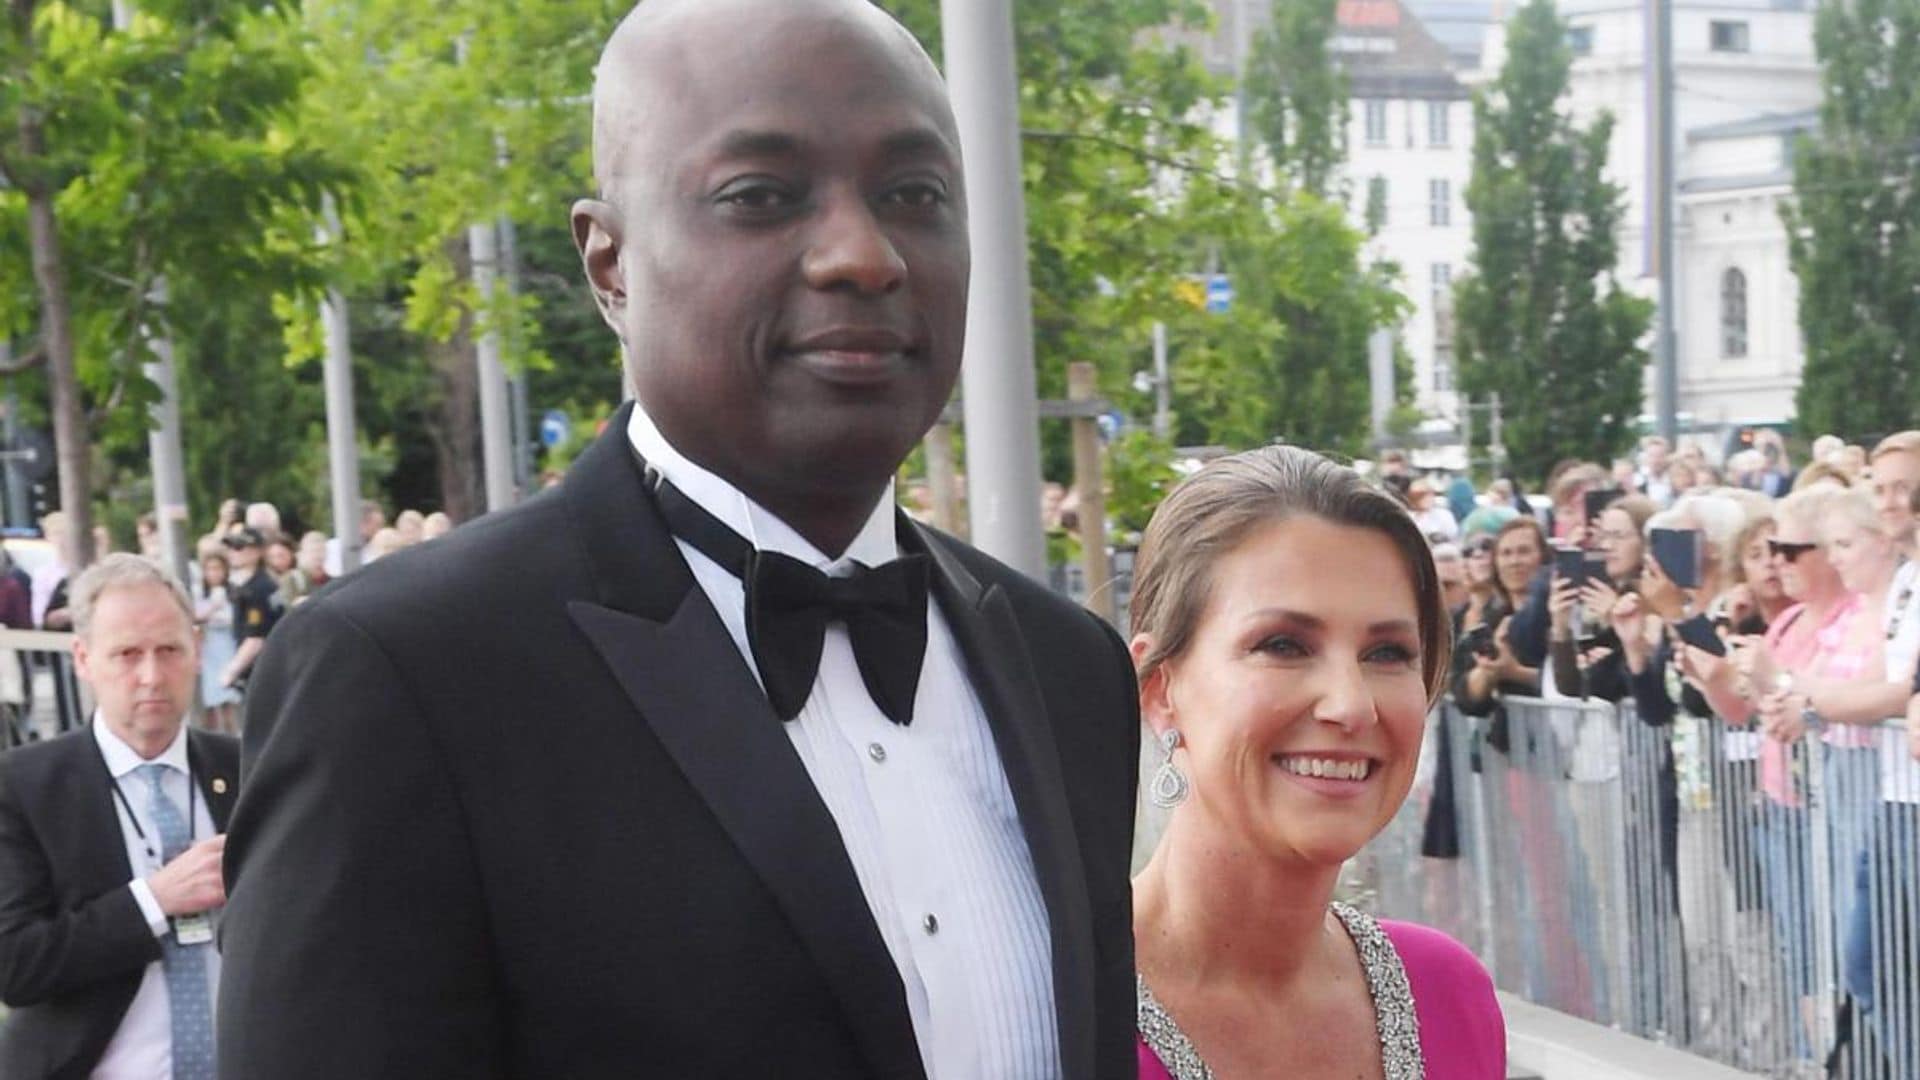 Princess Märtha Louise and fiancé release video message following Royal House’s announcement